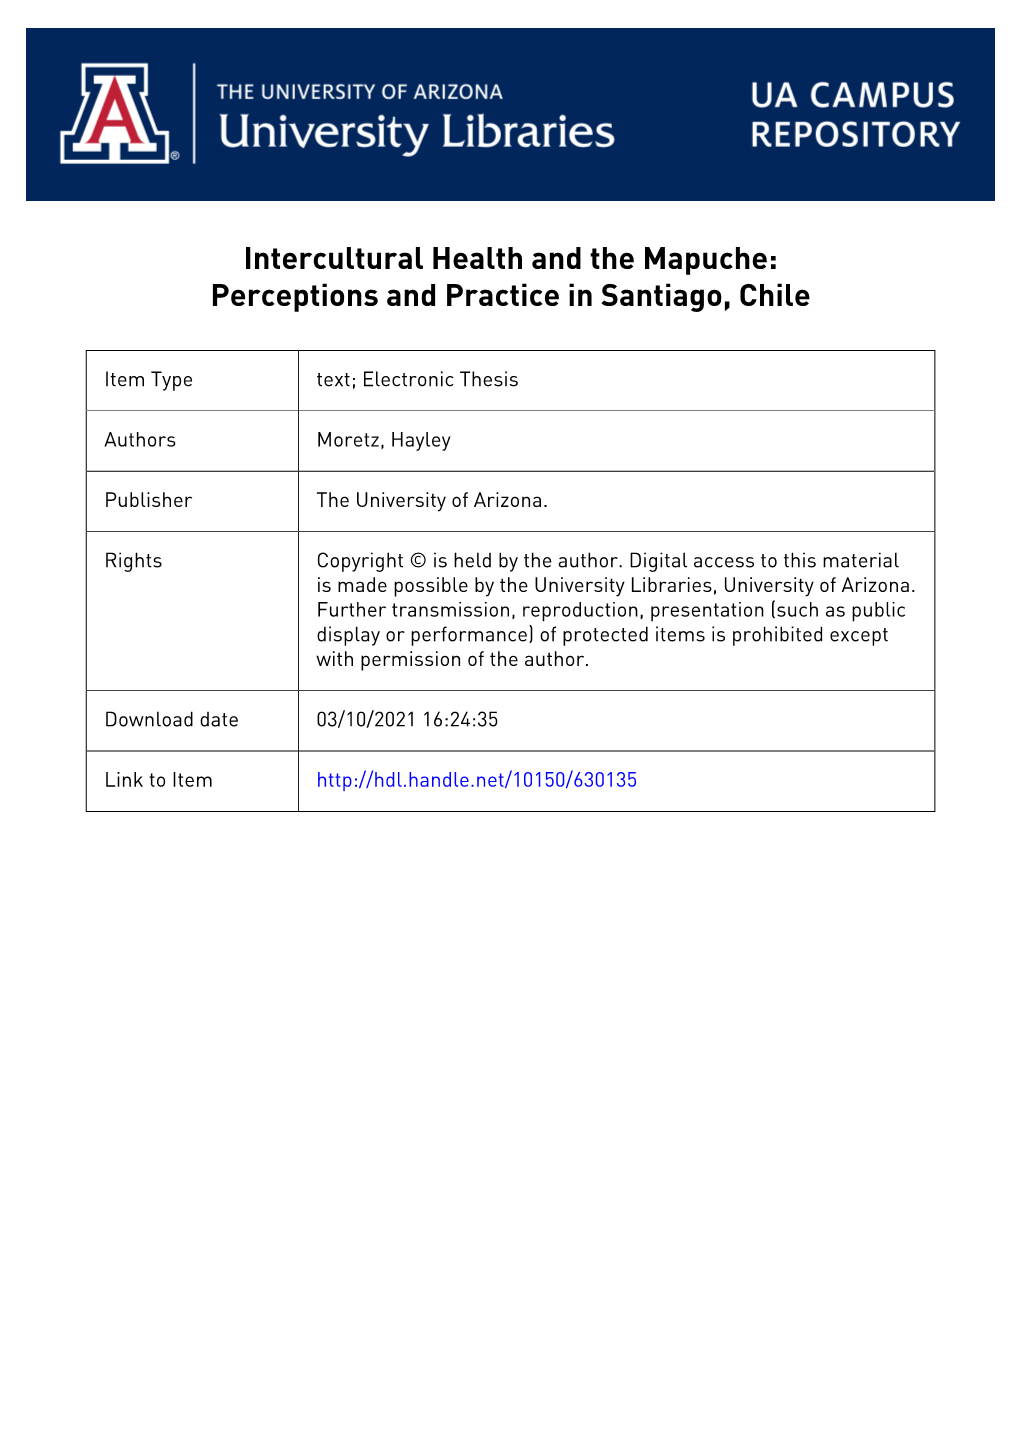 Intercultural Health and the Mapuche: Perceptions and Practice in Santiago, Chile